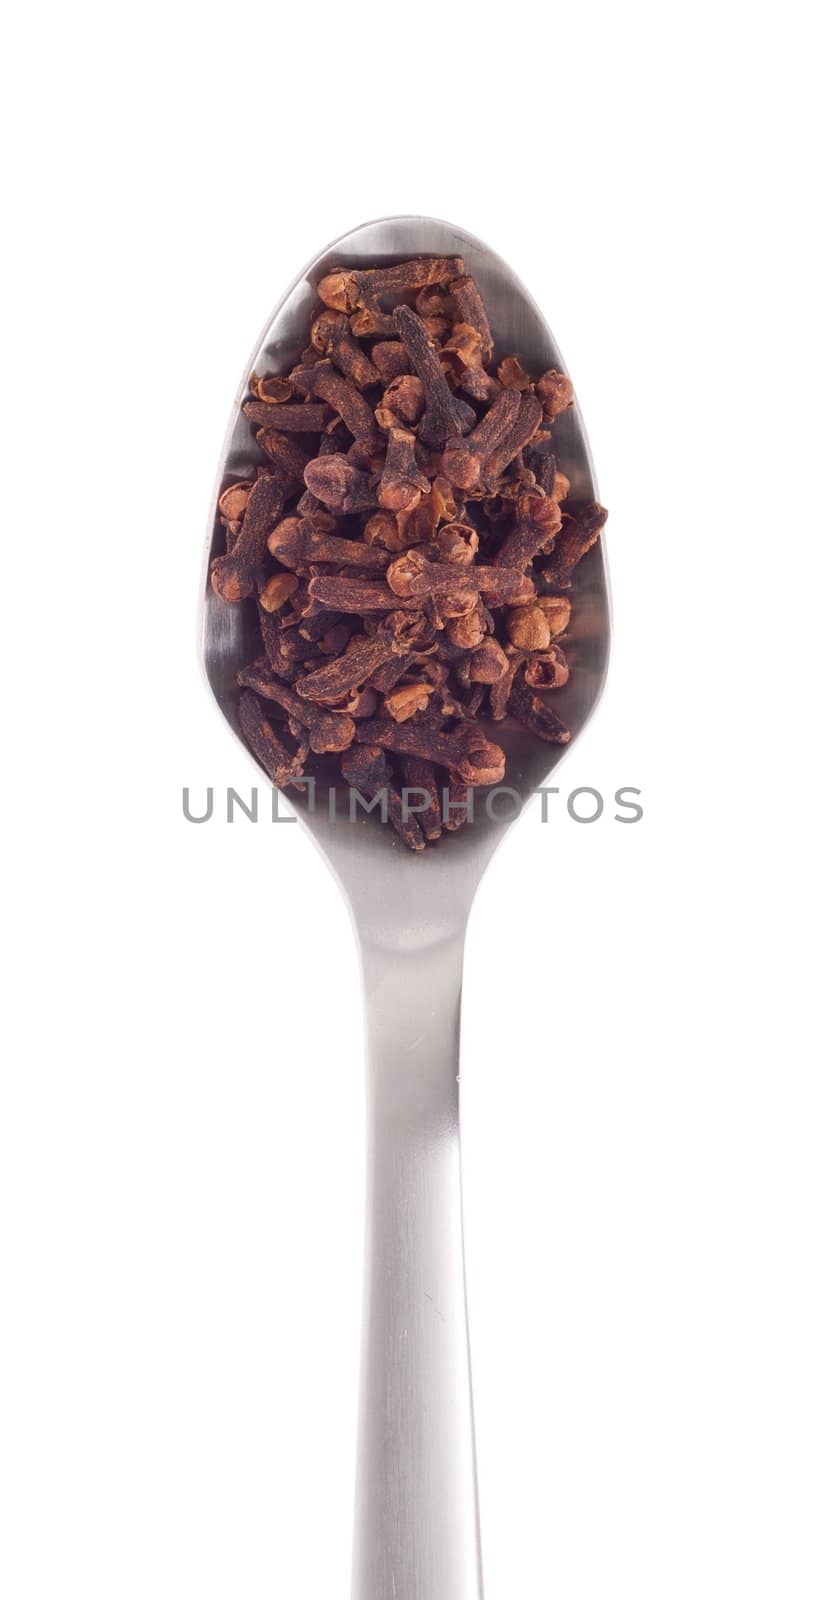 cloves spice on a stainless steel spoon, isolated on white background